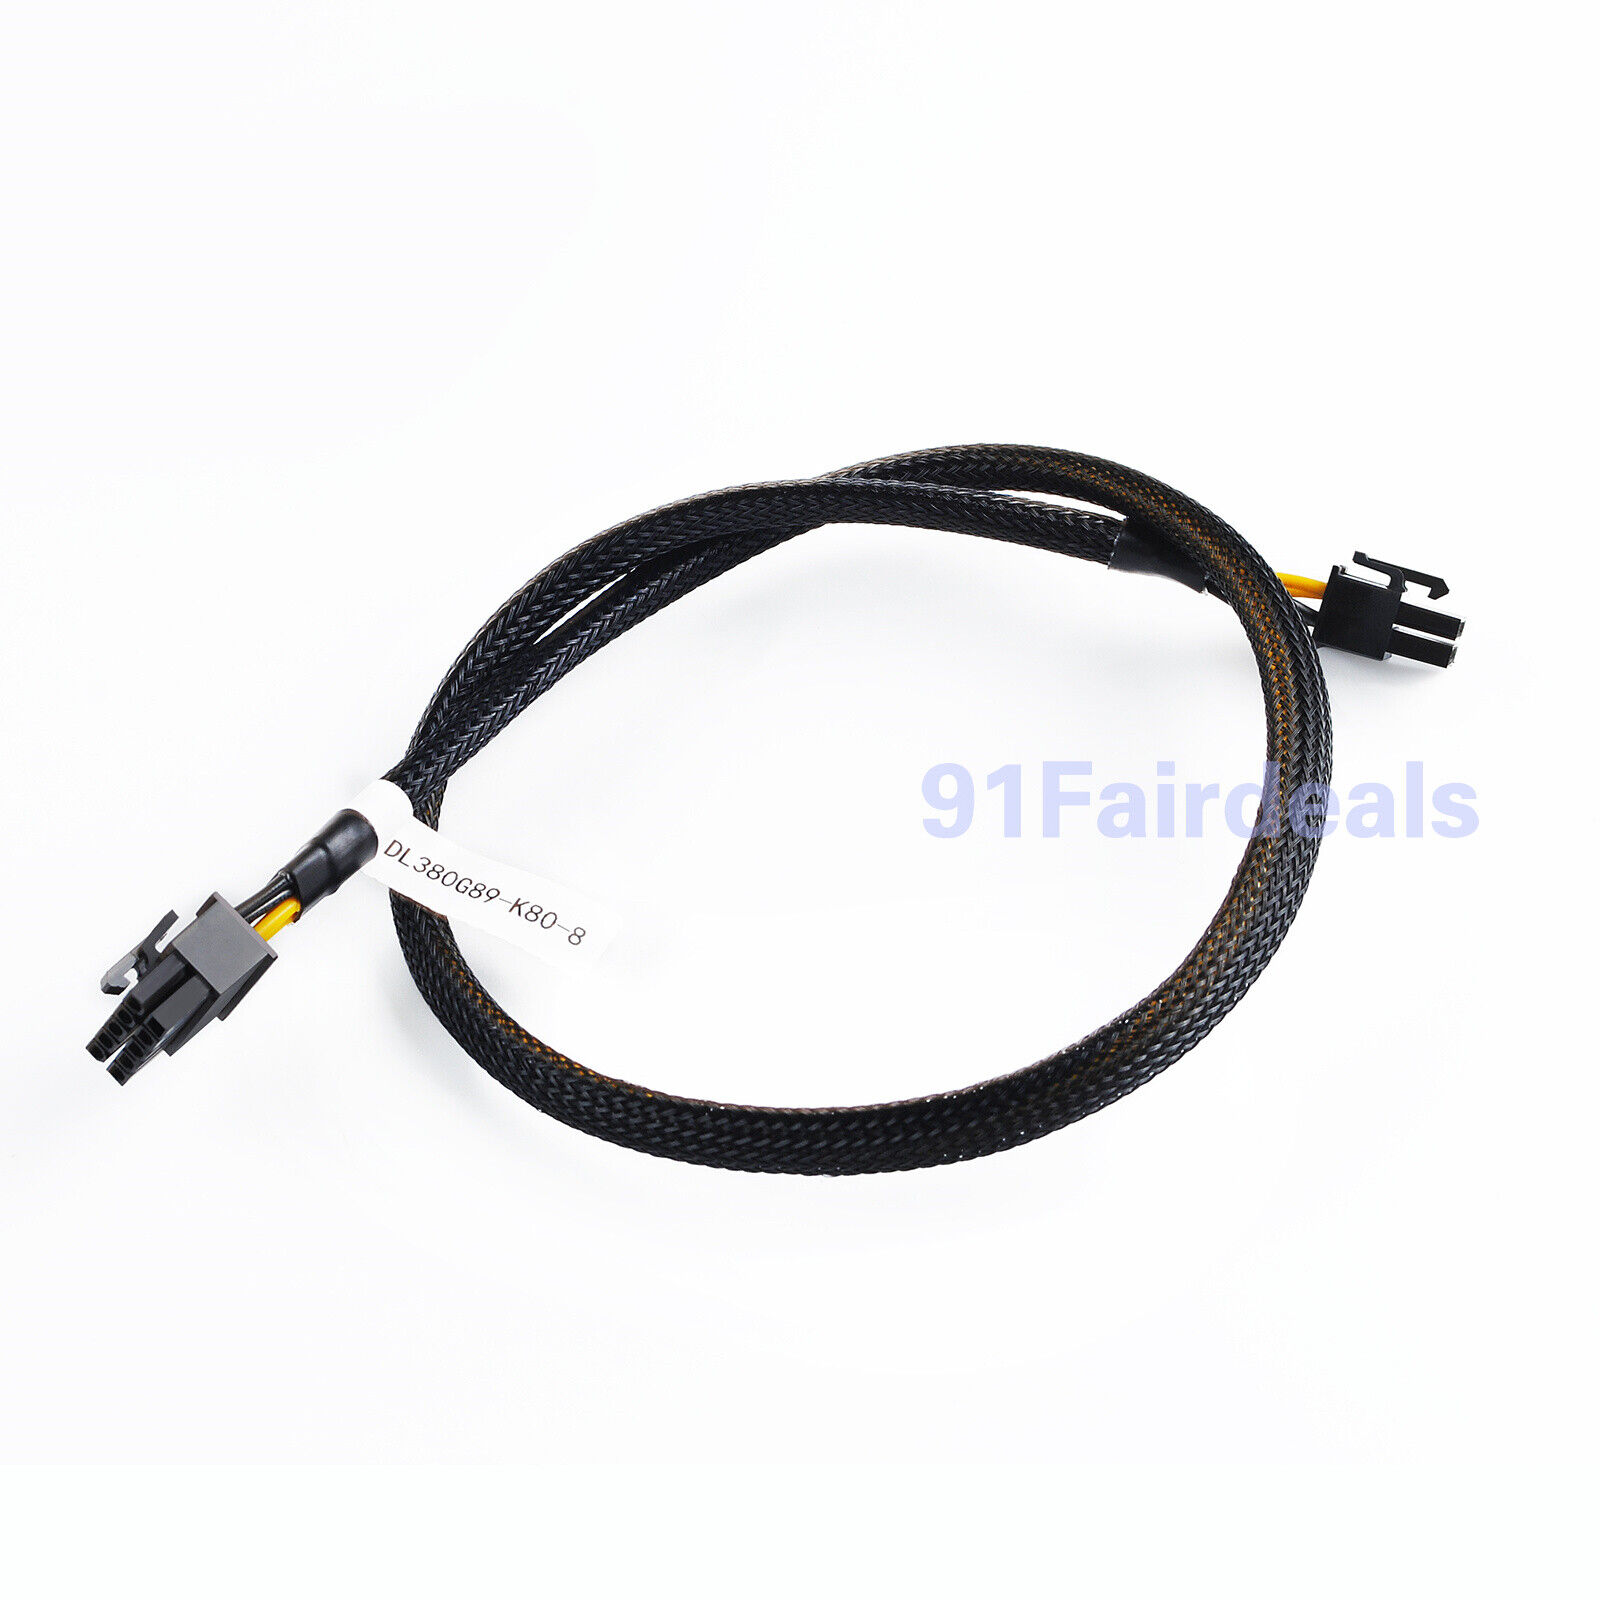 10p to 8pin For HP DL380 G8 and Nvidia K80/M40/M60/P40/P100 PCIE GPU Power Cable